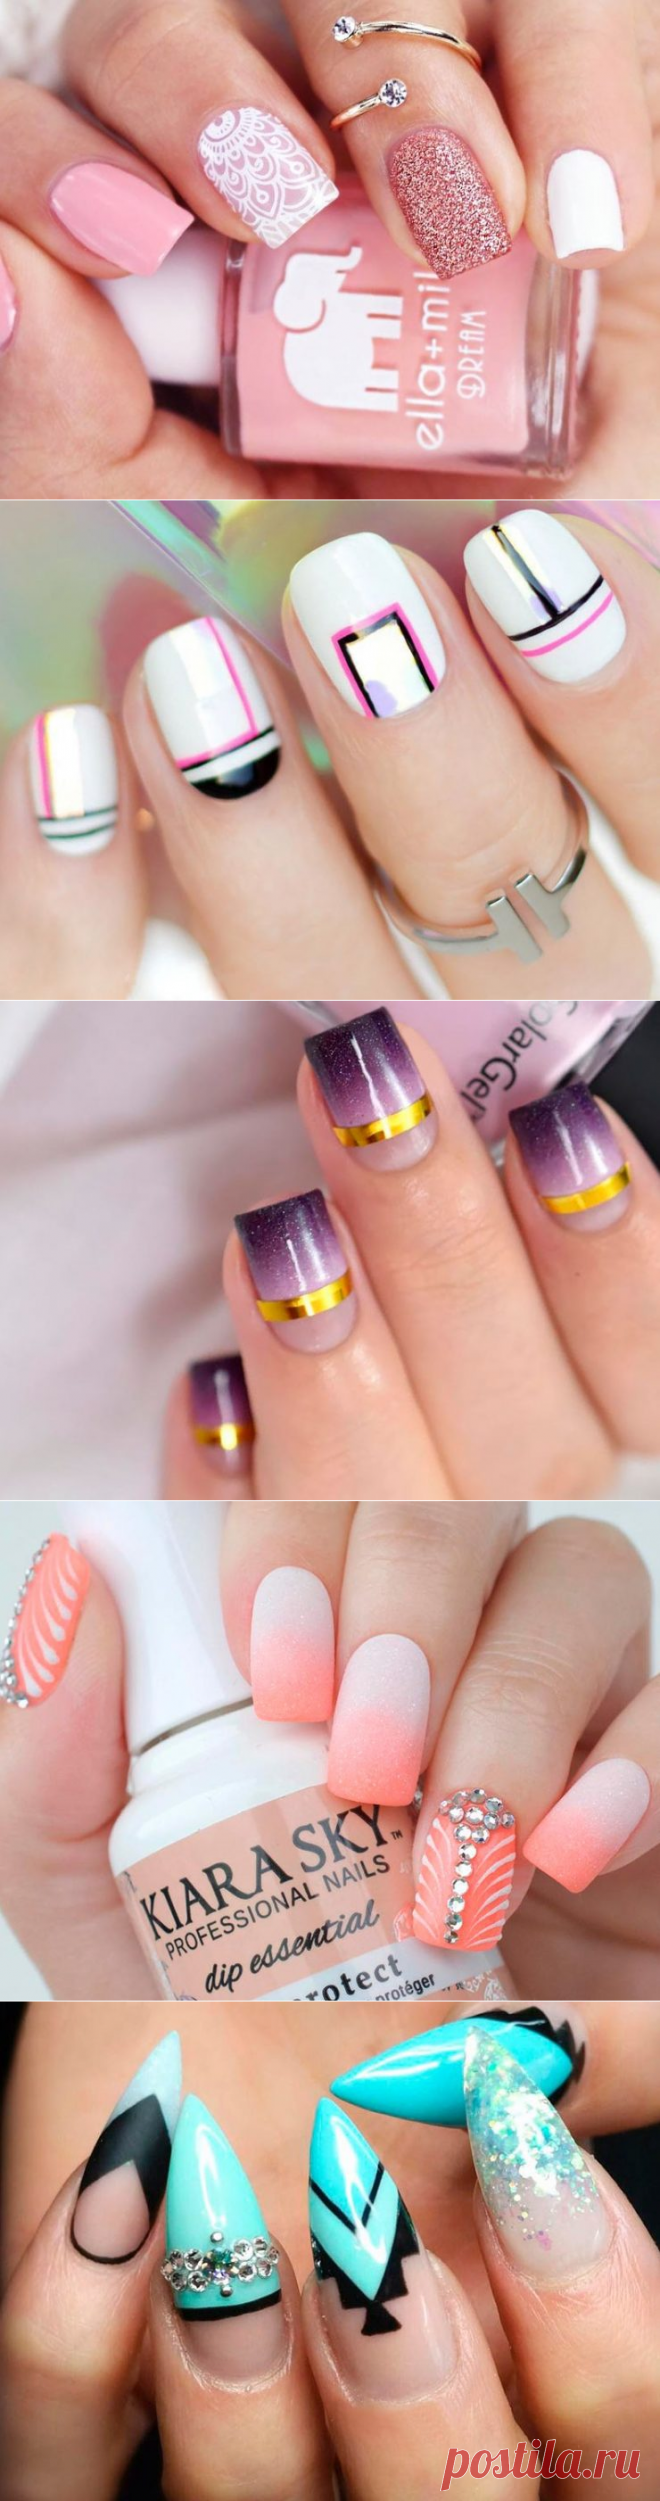 Best Archives of Trendy Nail Colors in 2017| NailDesignsJournal.com